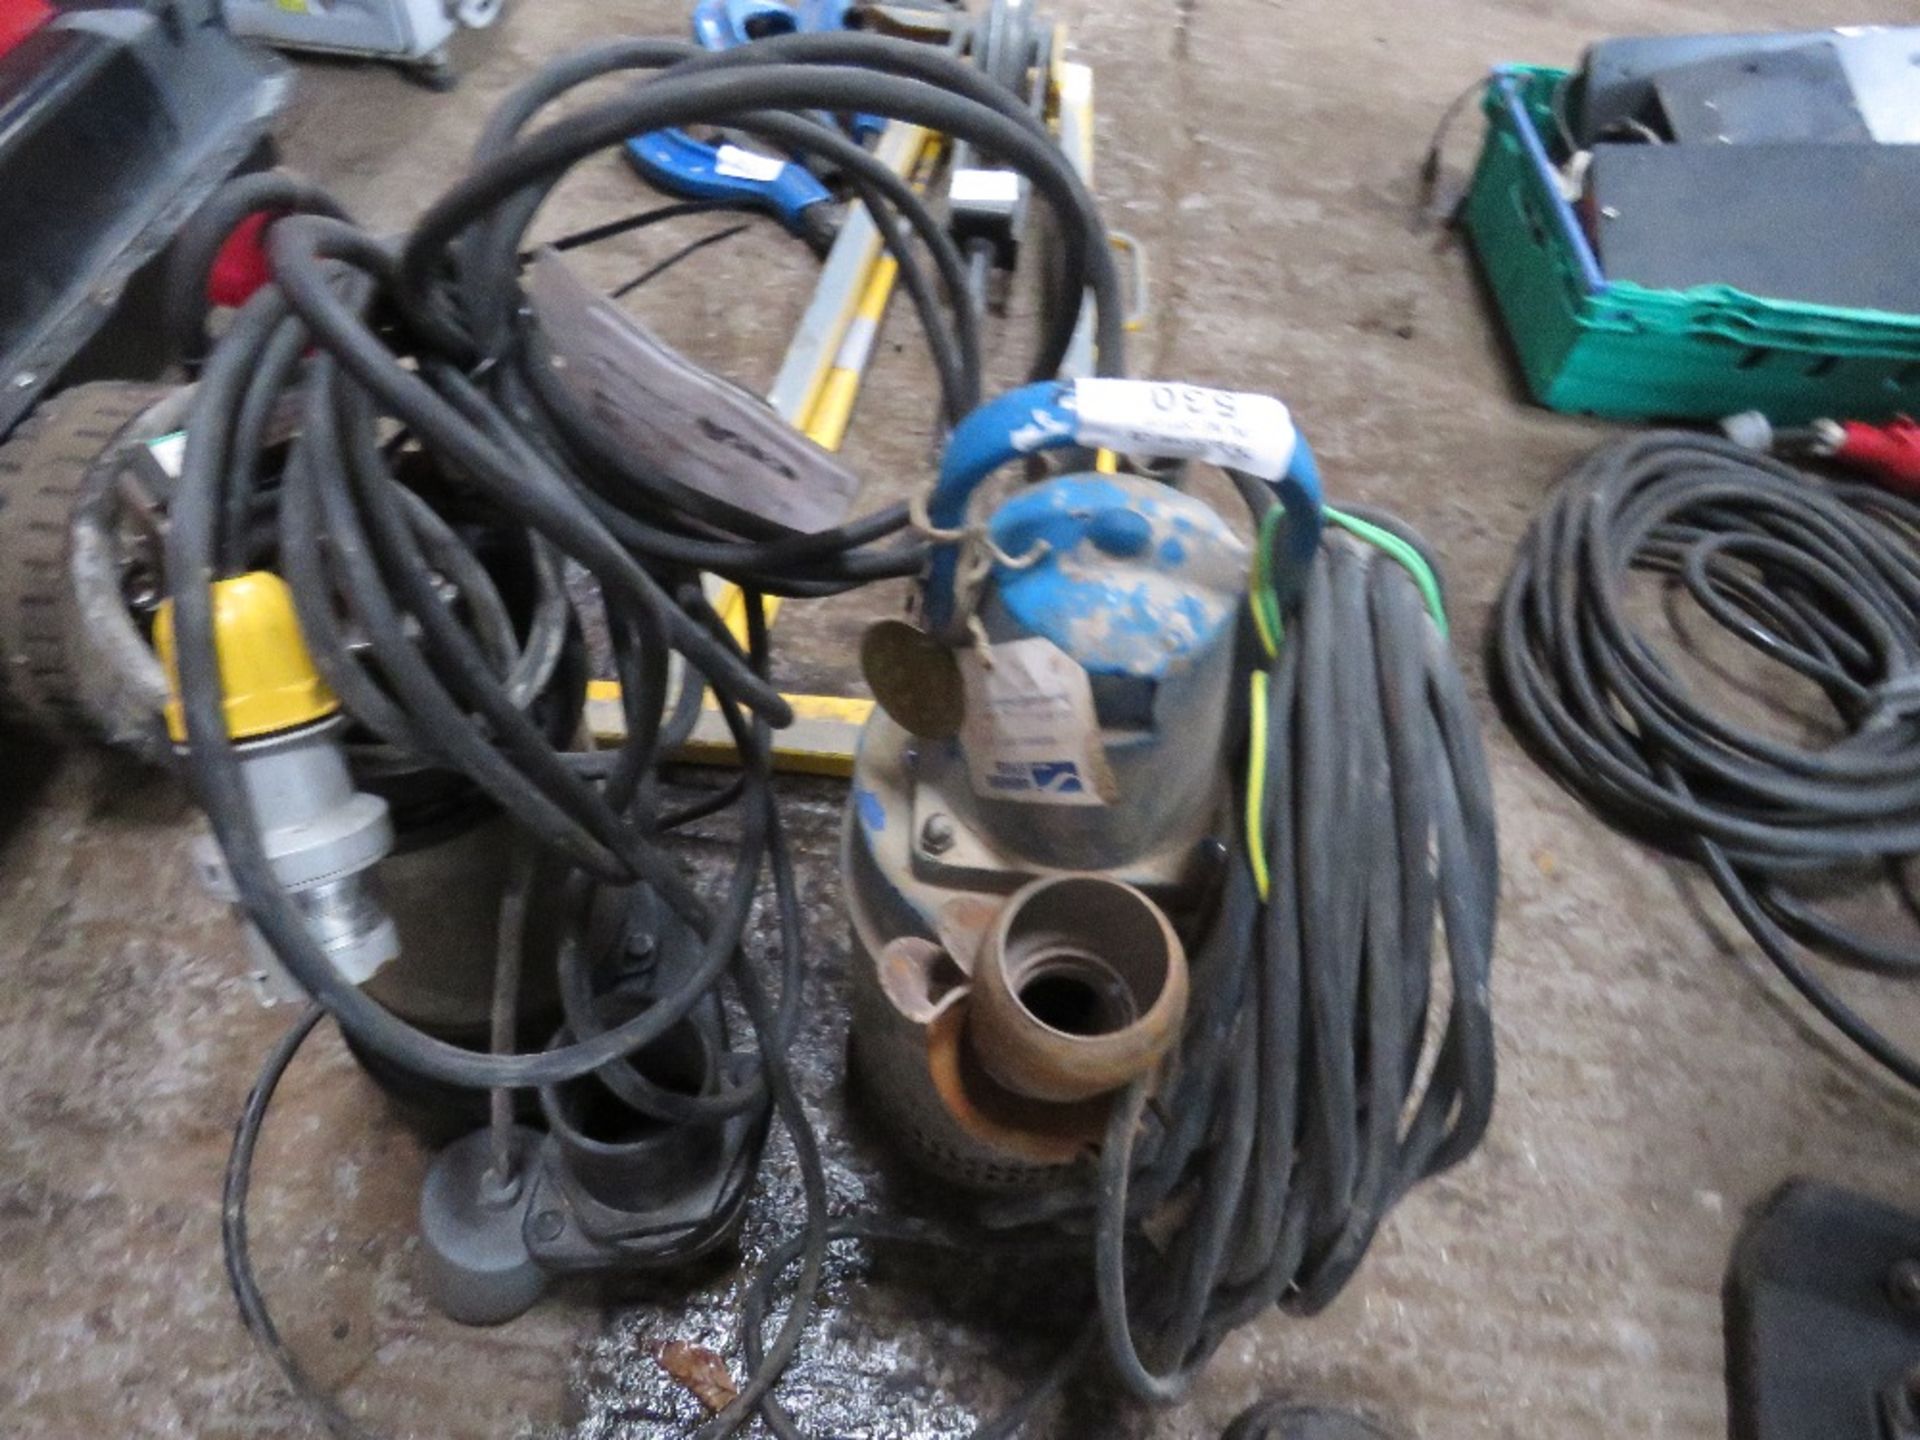 2 X 110VOLT SUBMERSIBLE WATER PUMPS. - Image 2 of 2